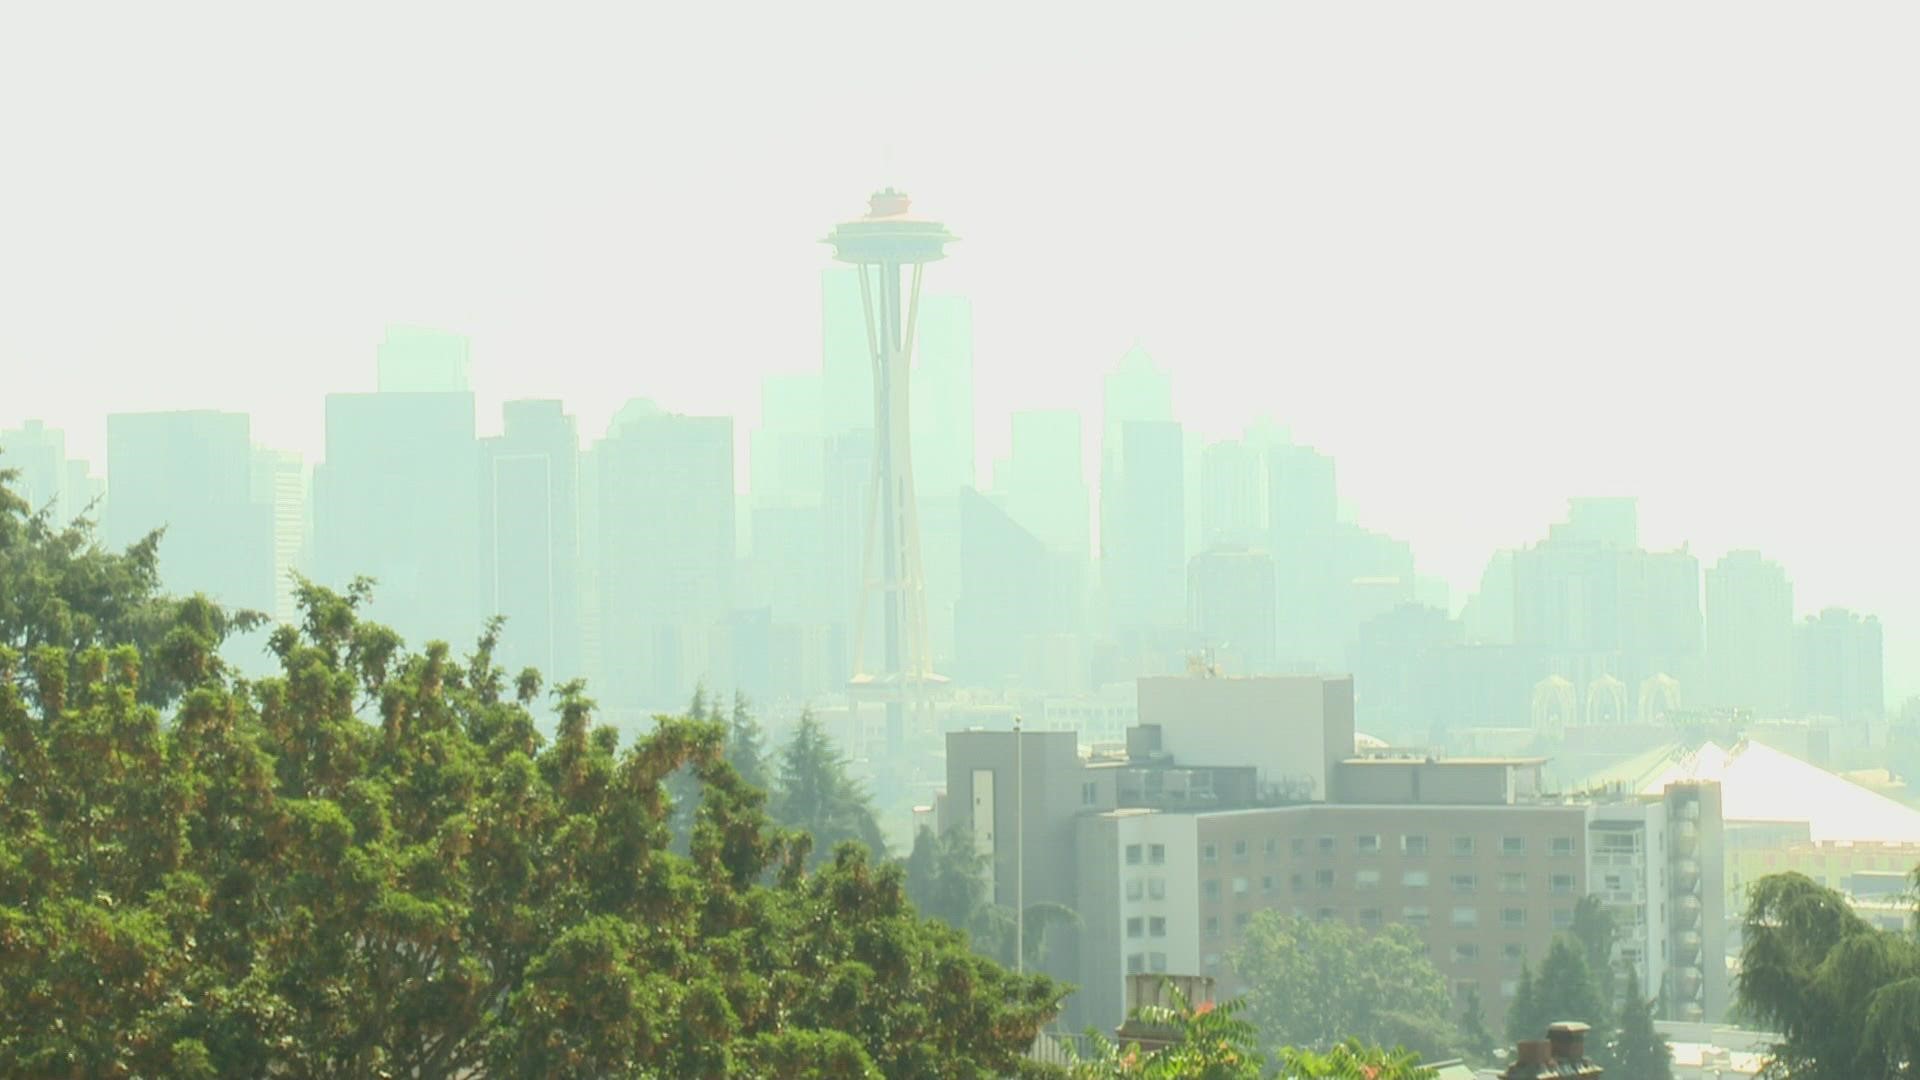 An Air Quality Alert is in effect for much of the Seattle area because fires could cause health concerns for people with respiratory issues.